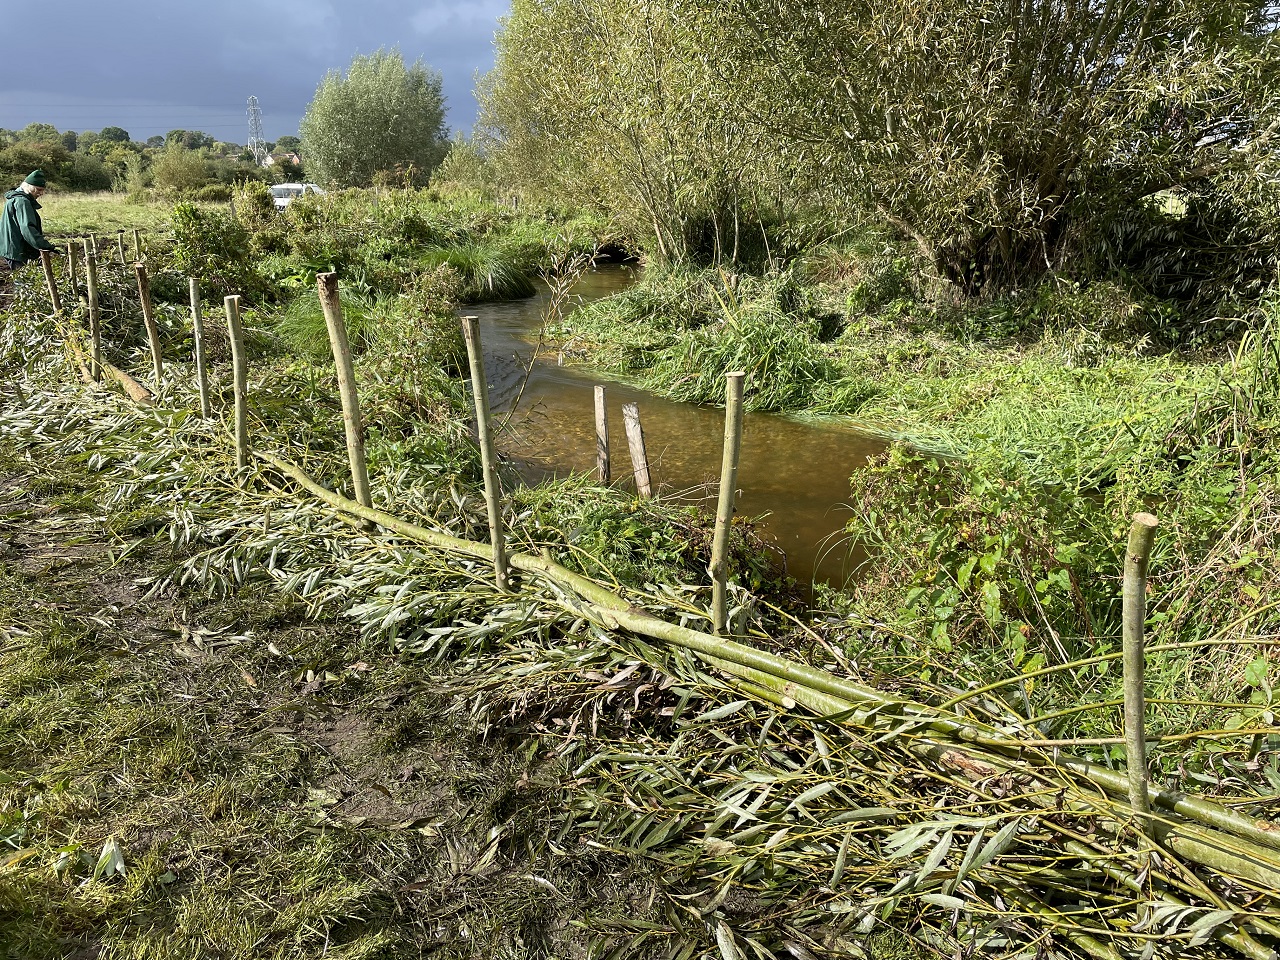 The new dead hedge at Bassetts Mead protecting the river